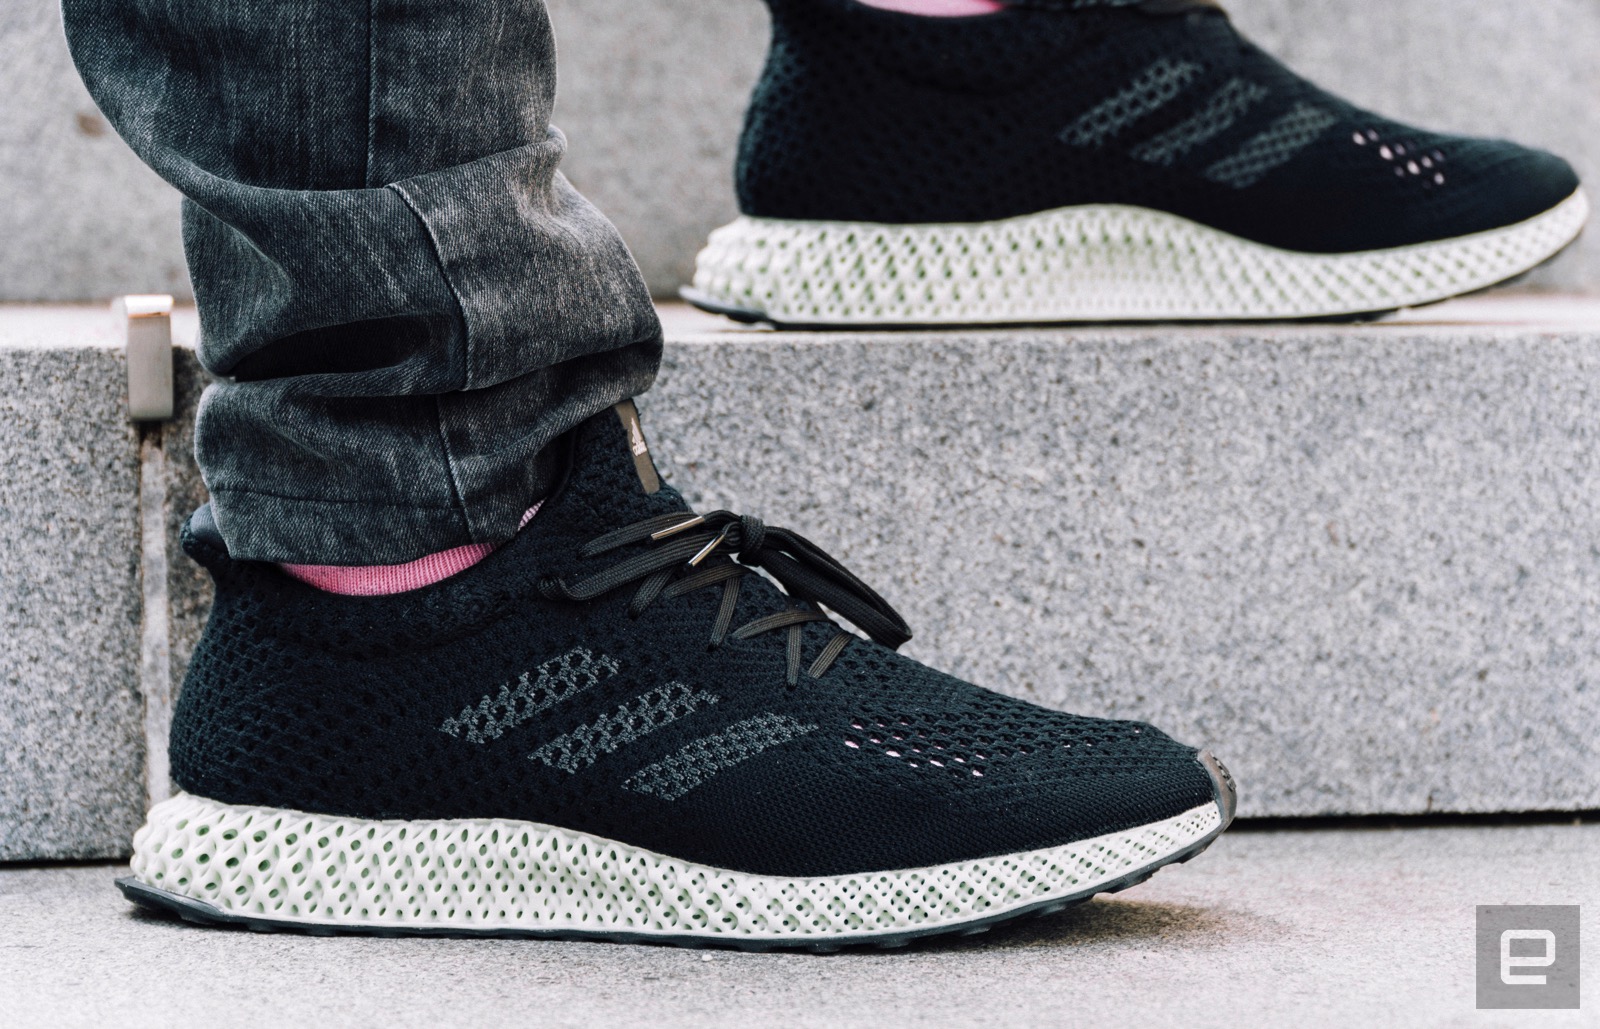 Adidas Futurecraft 4D shoes: The fourth dimension is hype - Tips general  news